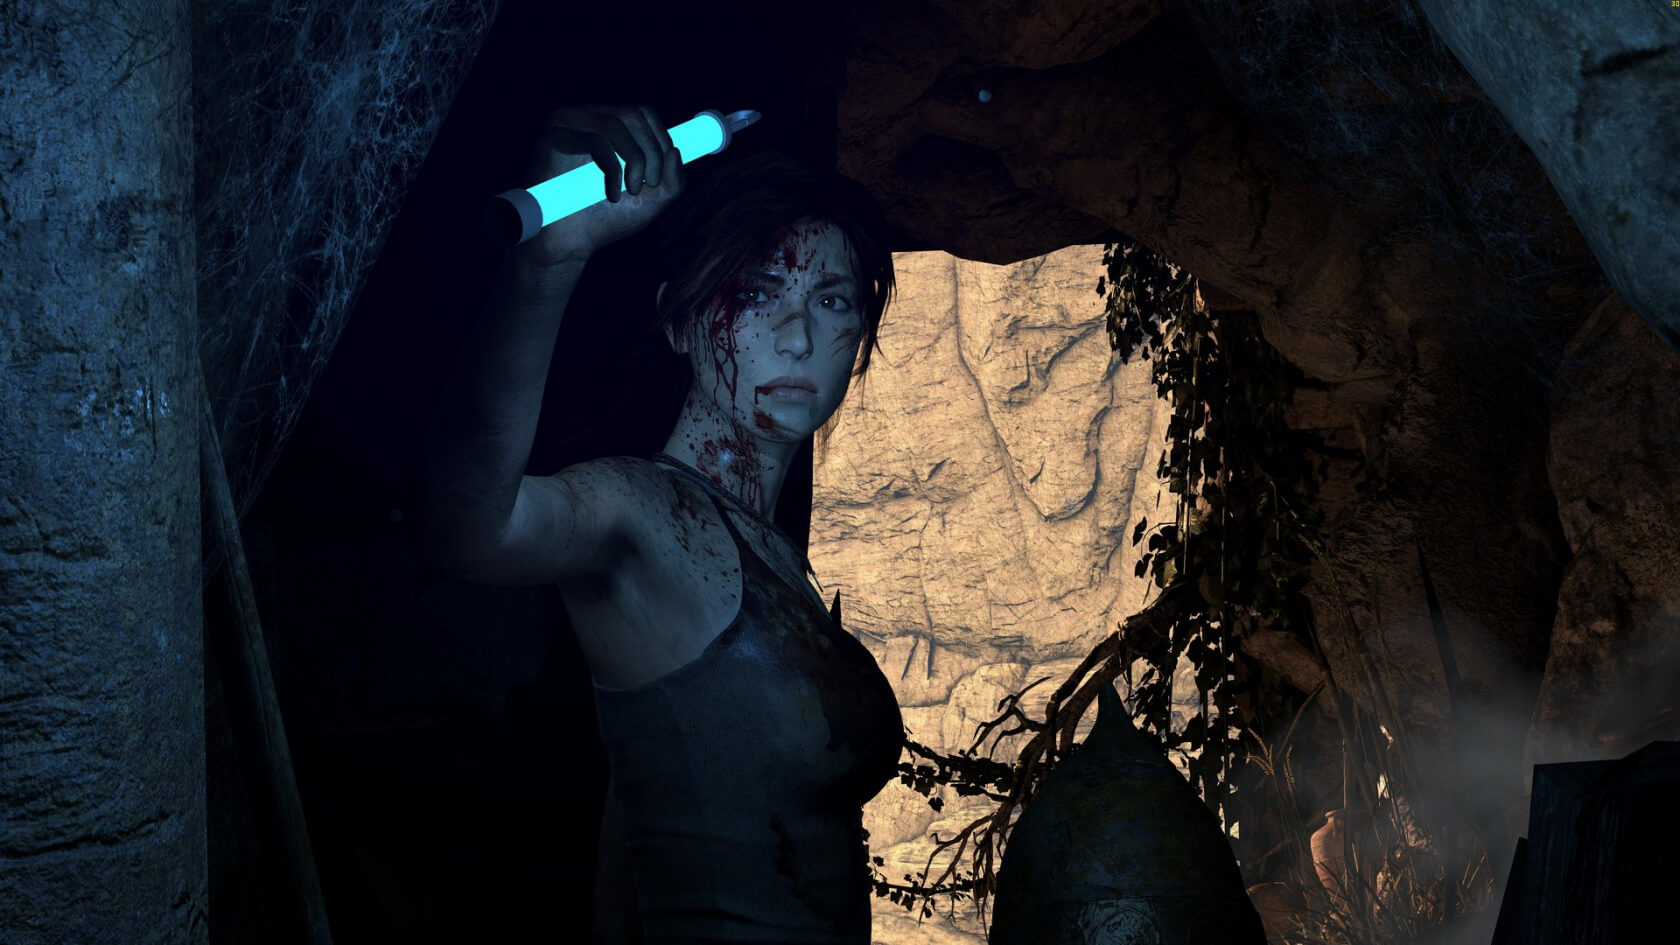 Square Enix tweets a new Tomb Raider game to be revealed in 2018